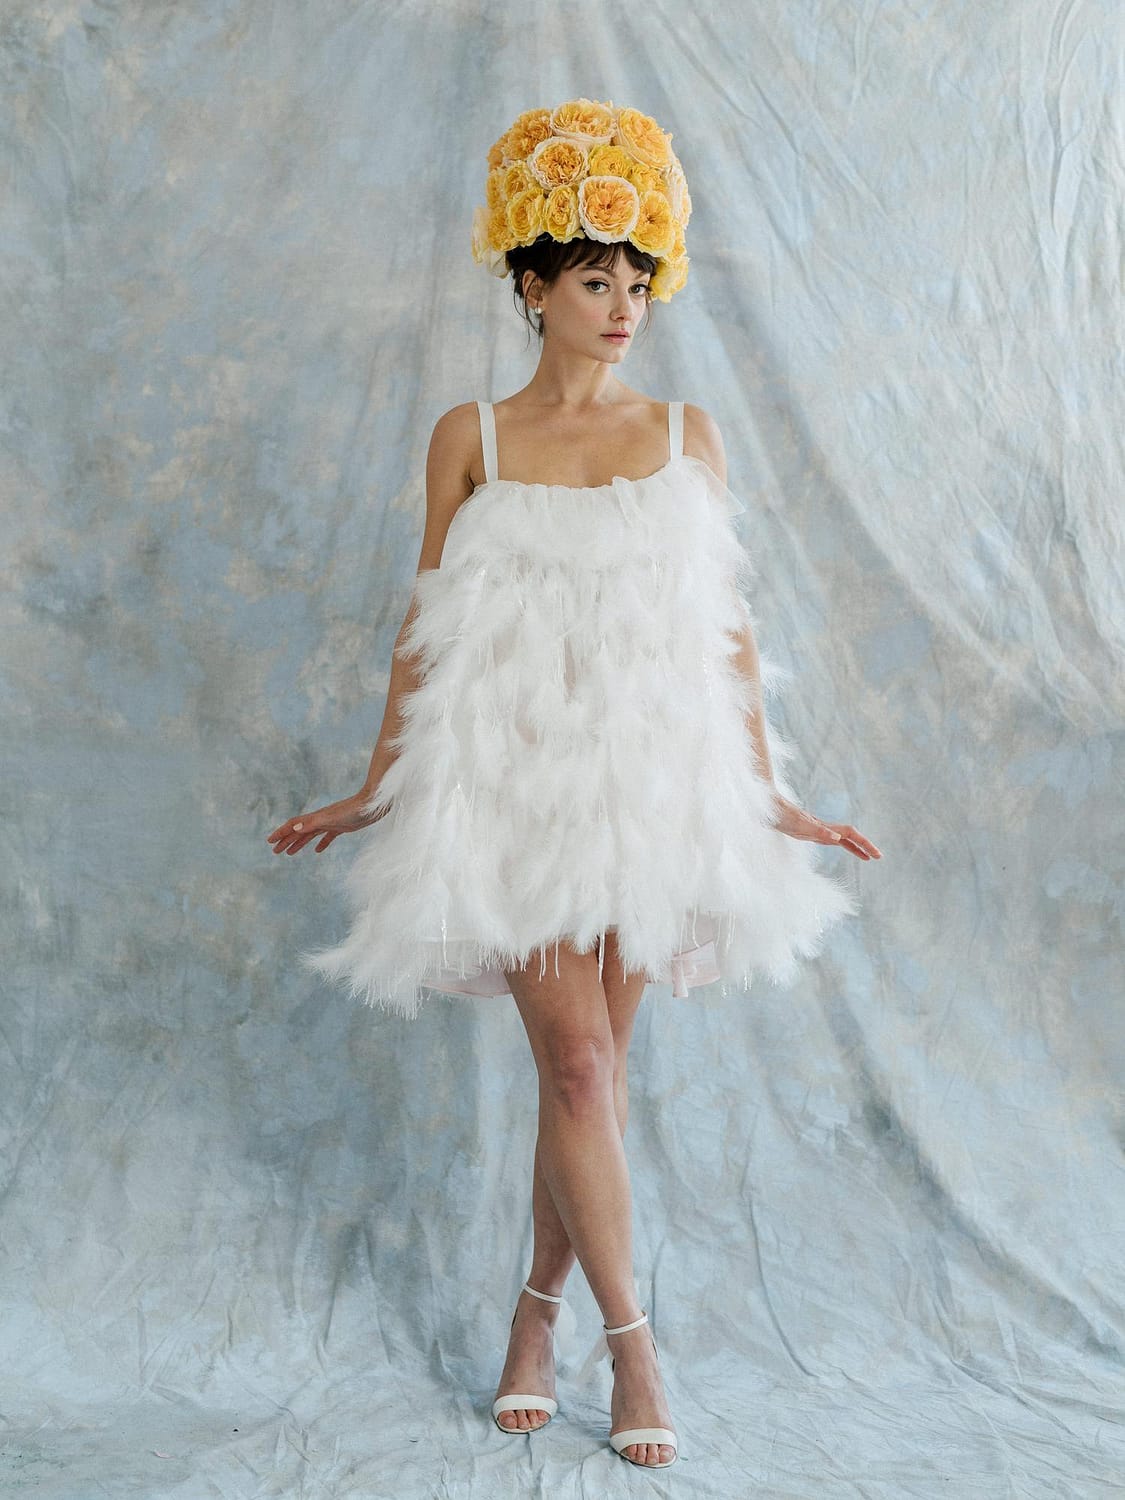 White Wedding Dress With Feathers And Rose Hat